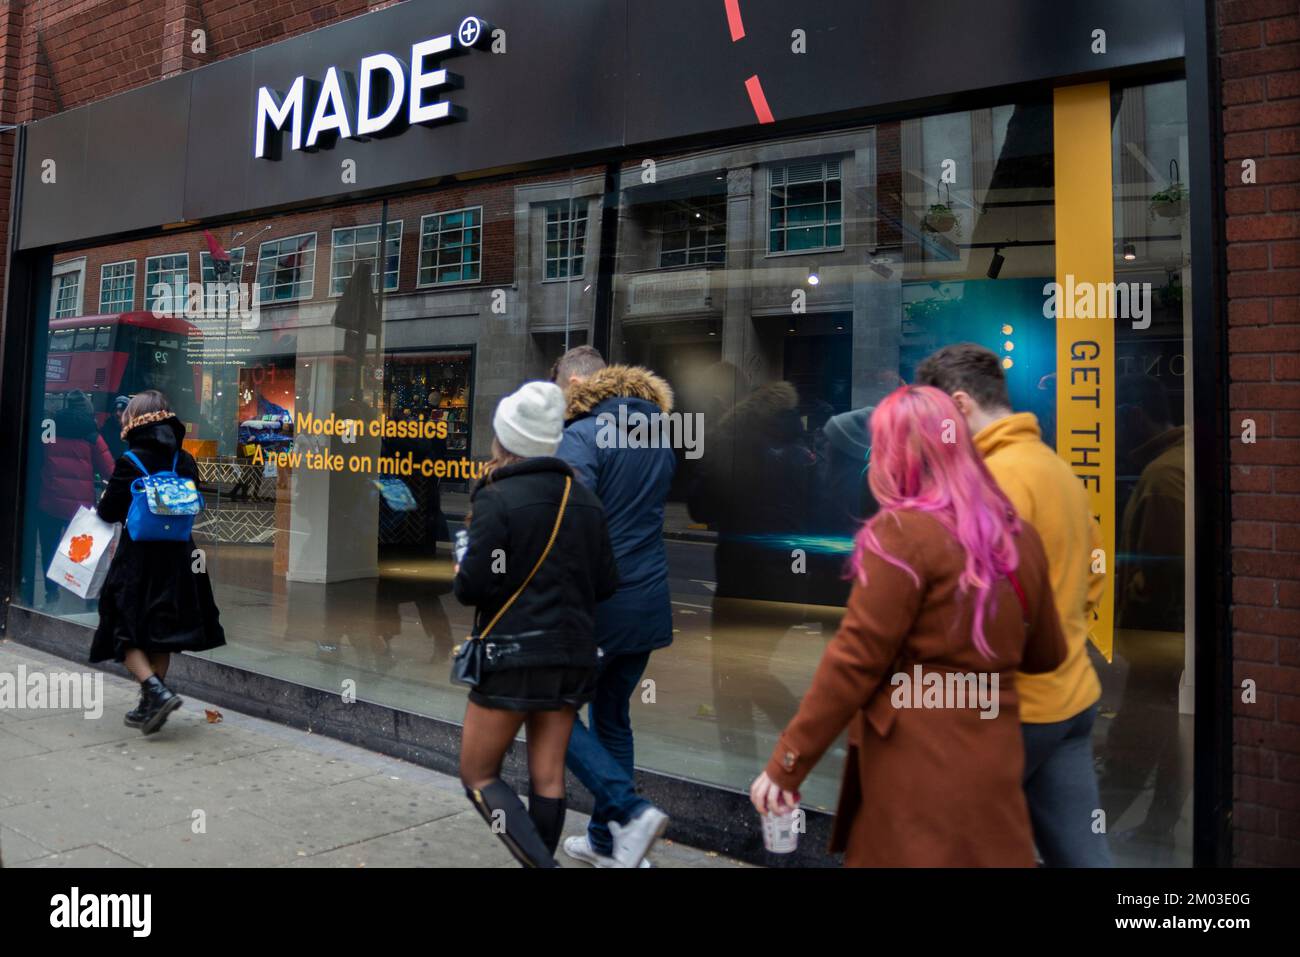 Made.com furniture store in Soho, London, UK. On 9 November 2022, Made.com went into administration. People passing showroom window Stock Photo